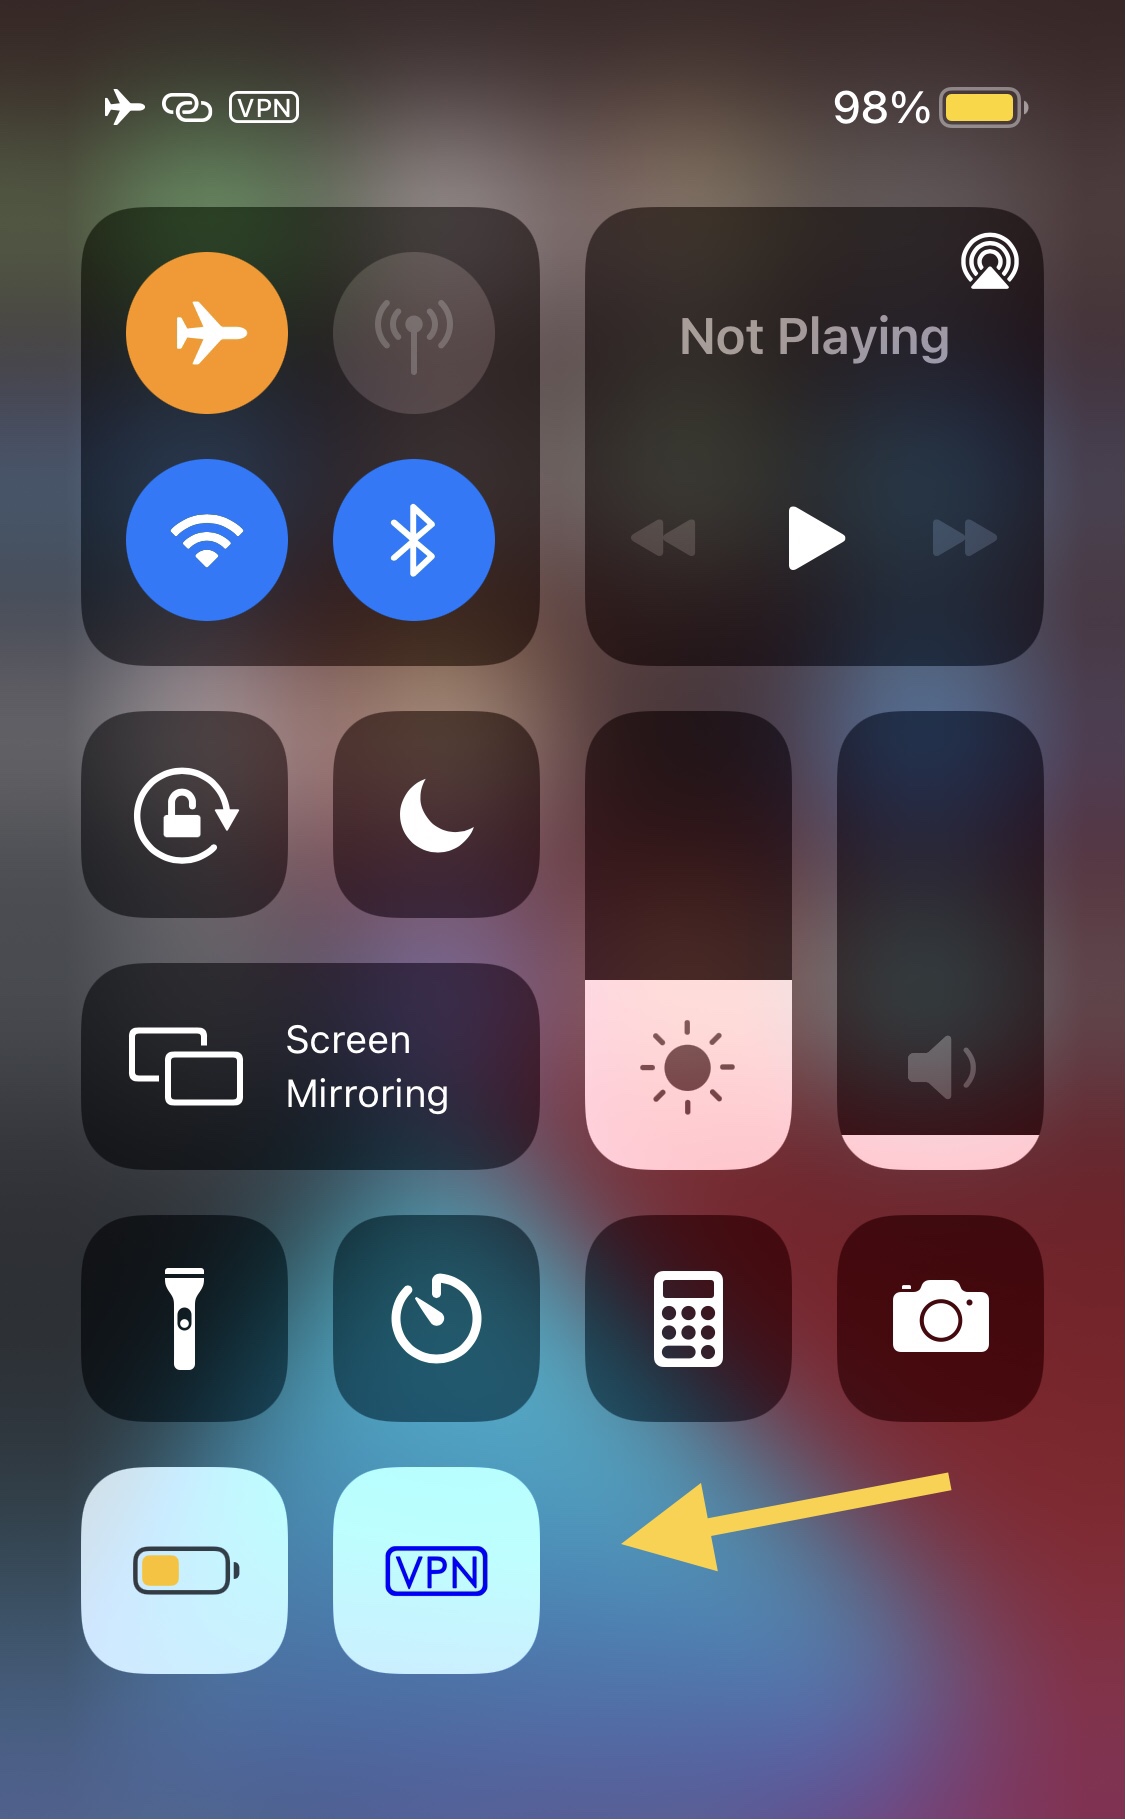 CCVPN toggle for Control Center.